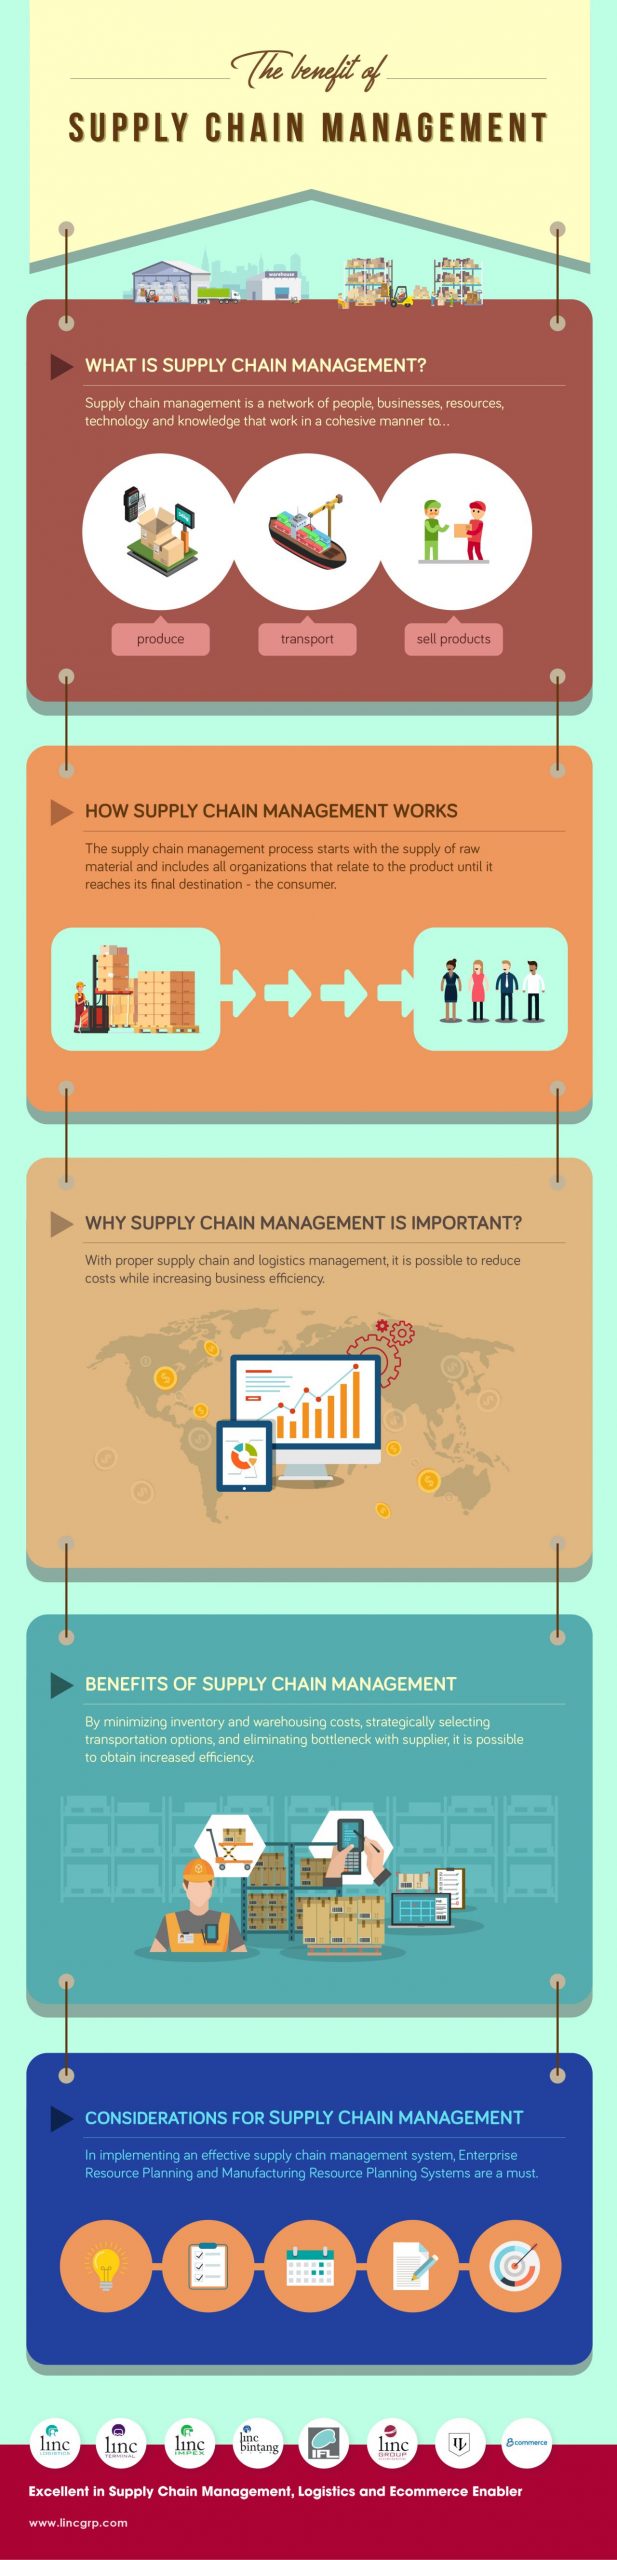 The Benefit of Supply Chain Management